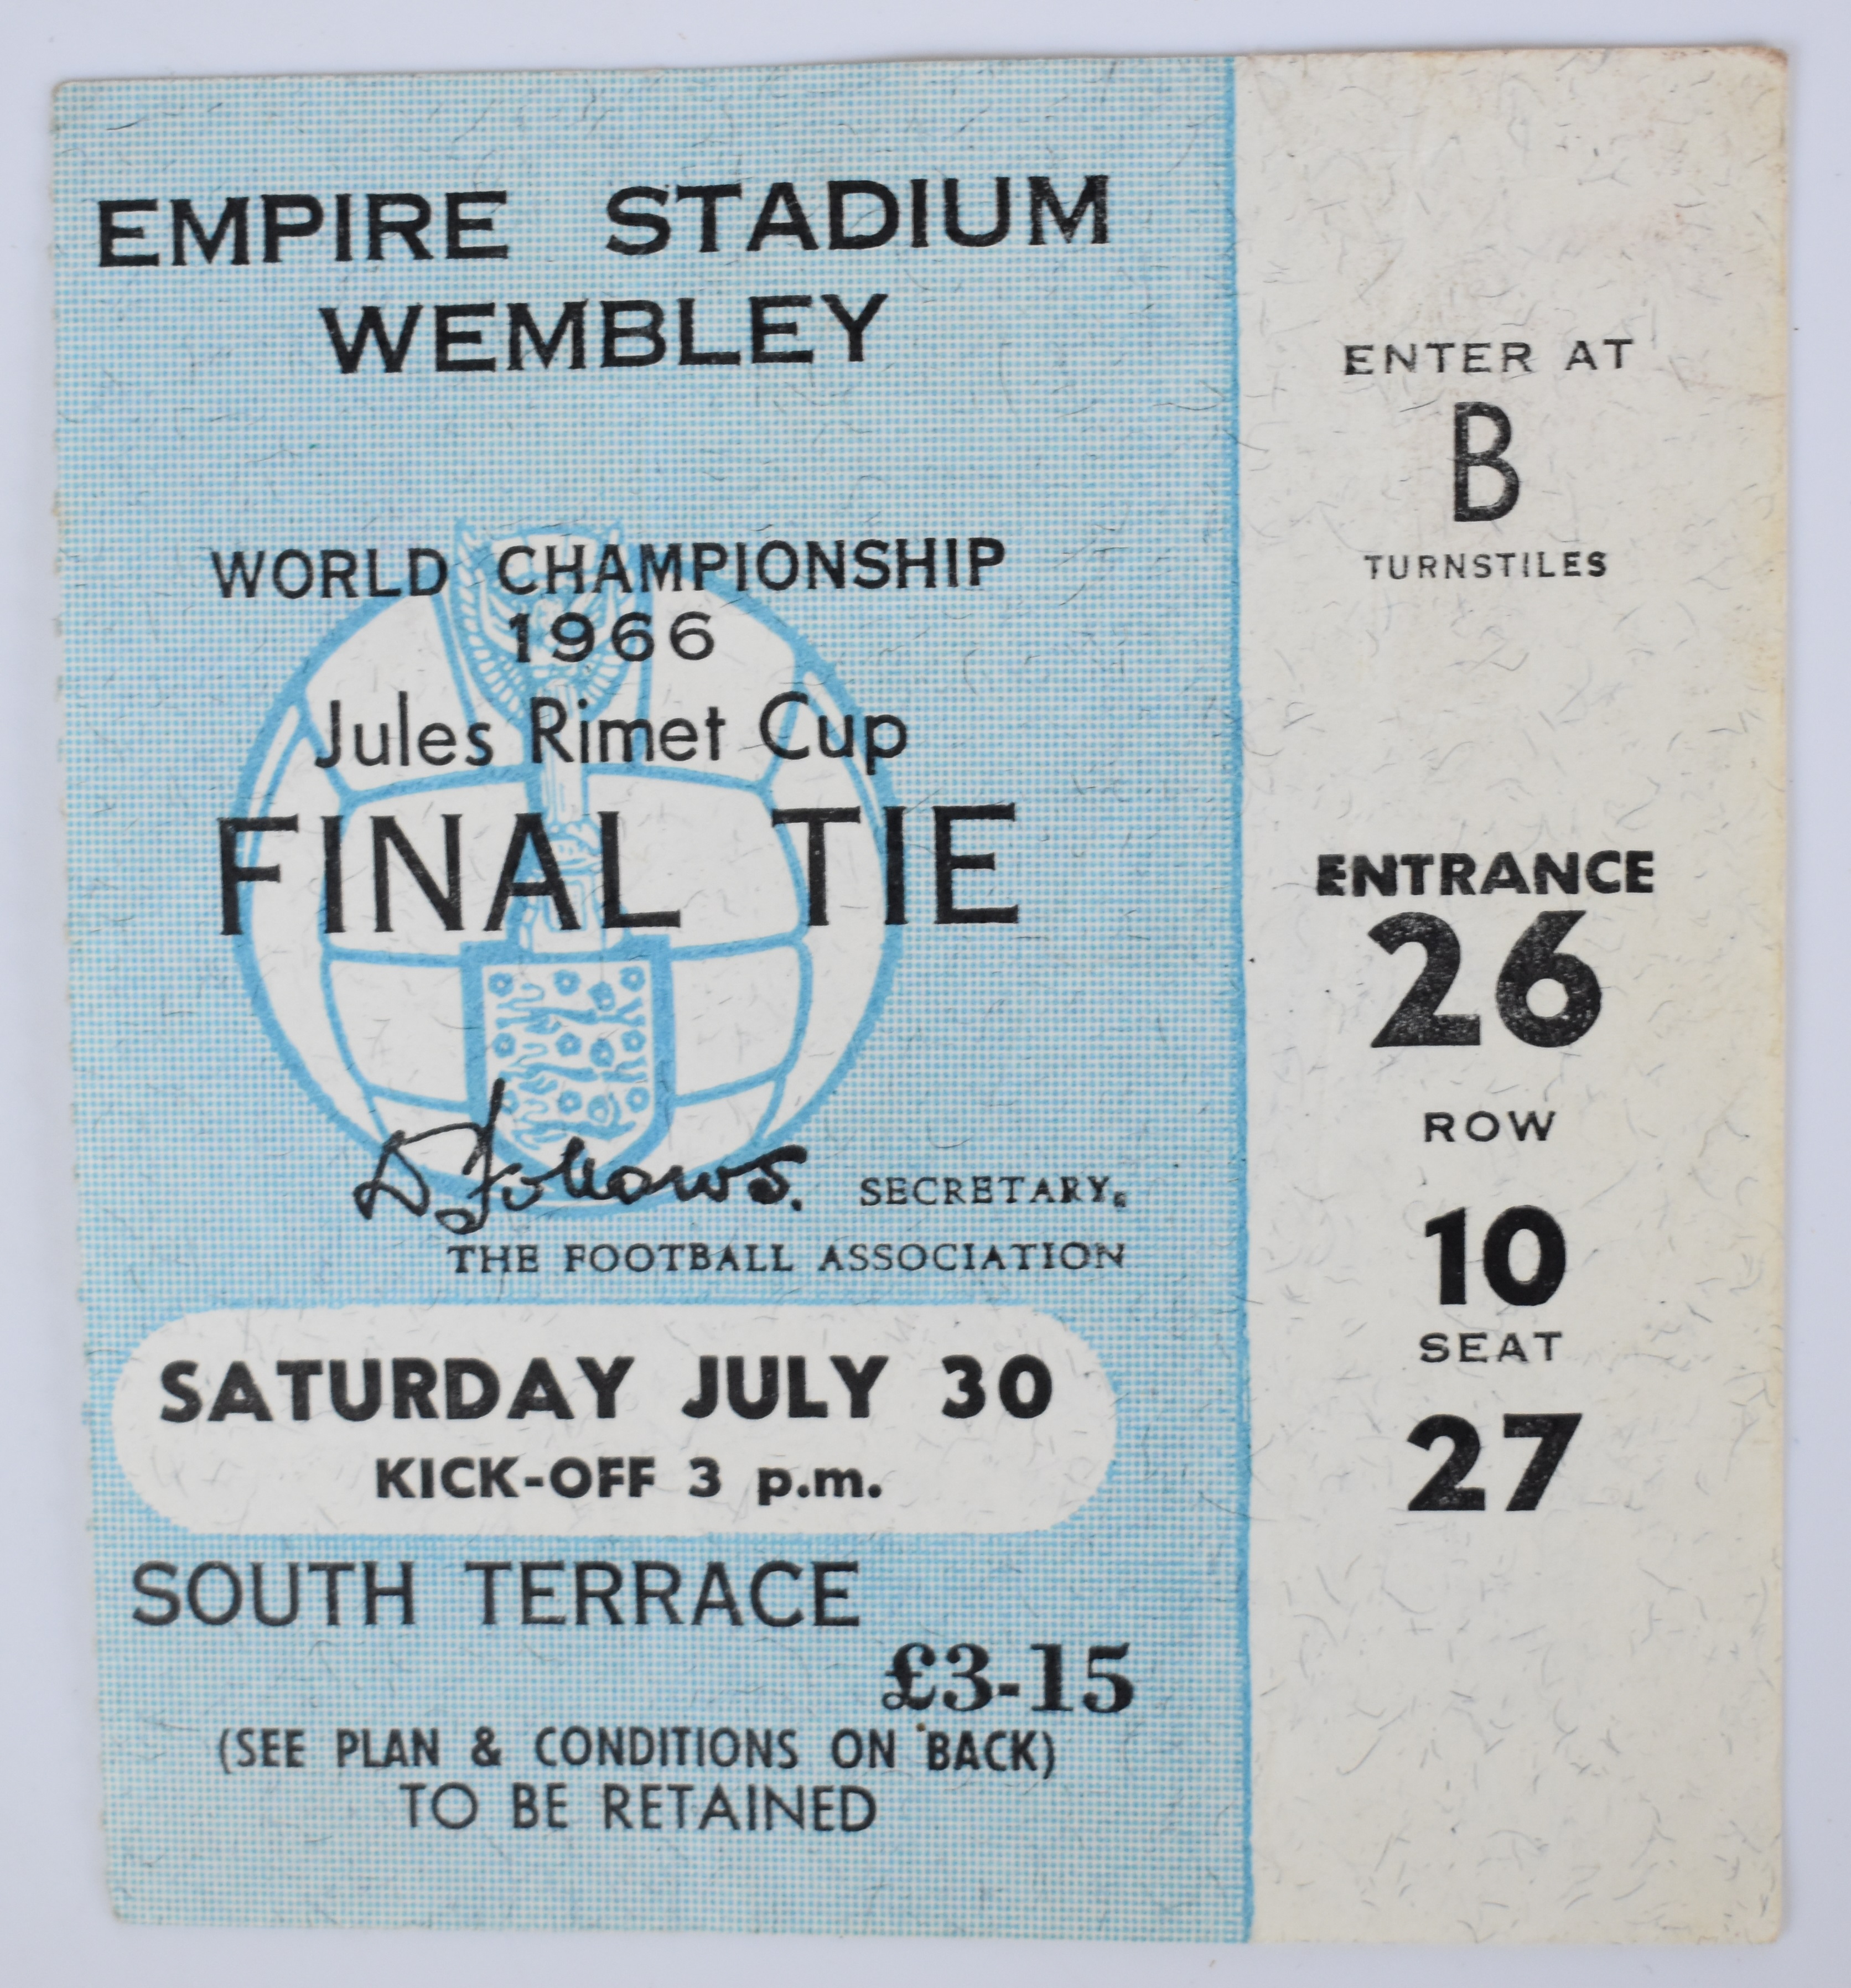 1966 Jules Rimet Cup World Championship football programme and ticket for the final tie England v - Image 5 of 8